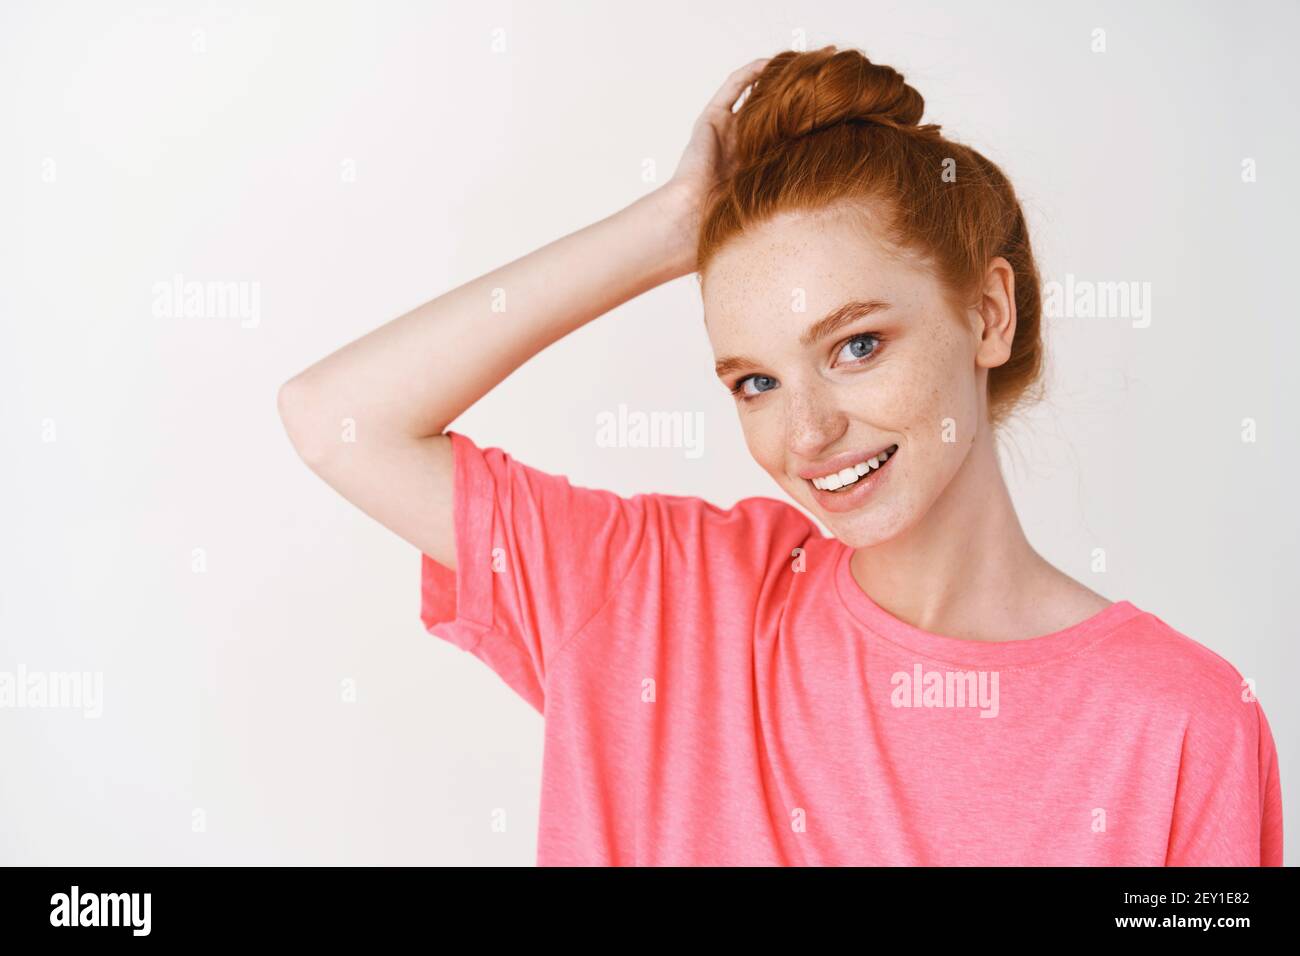 Beauty and skincare. Young woman with red hair combed in messy bun smiling cute at camera, showing healthy glowing skin without acne and blemishes Stock Photo